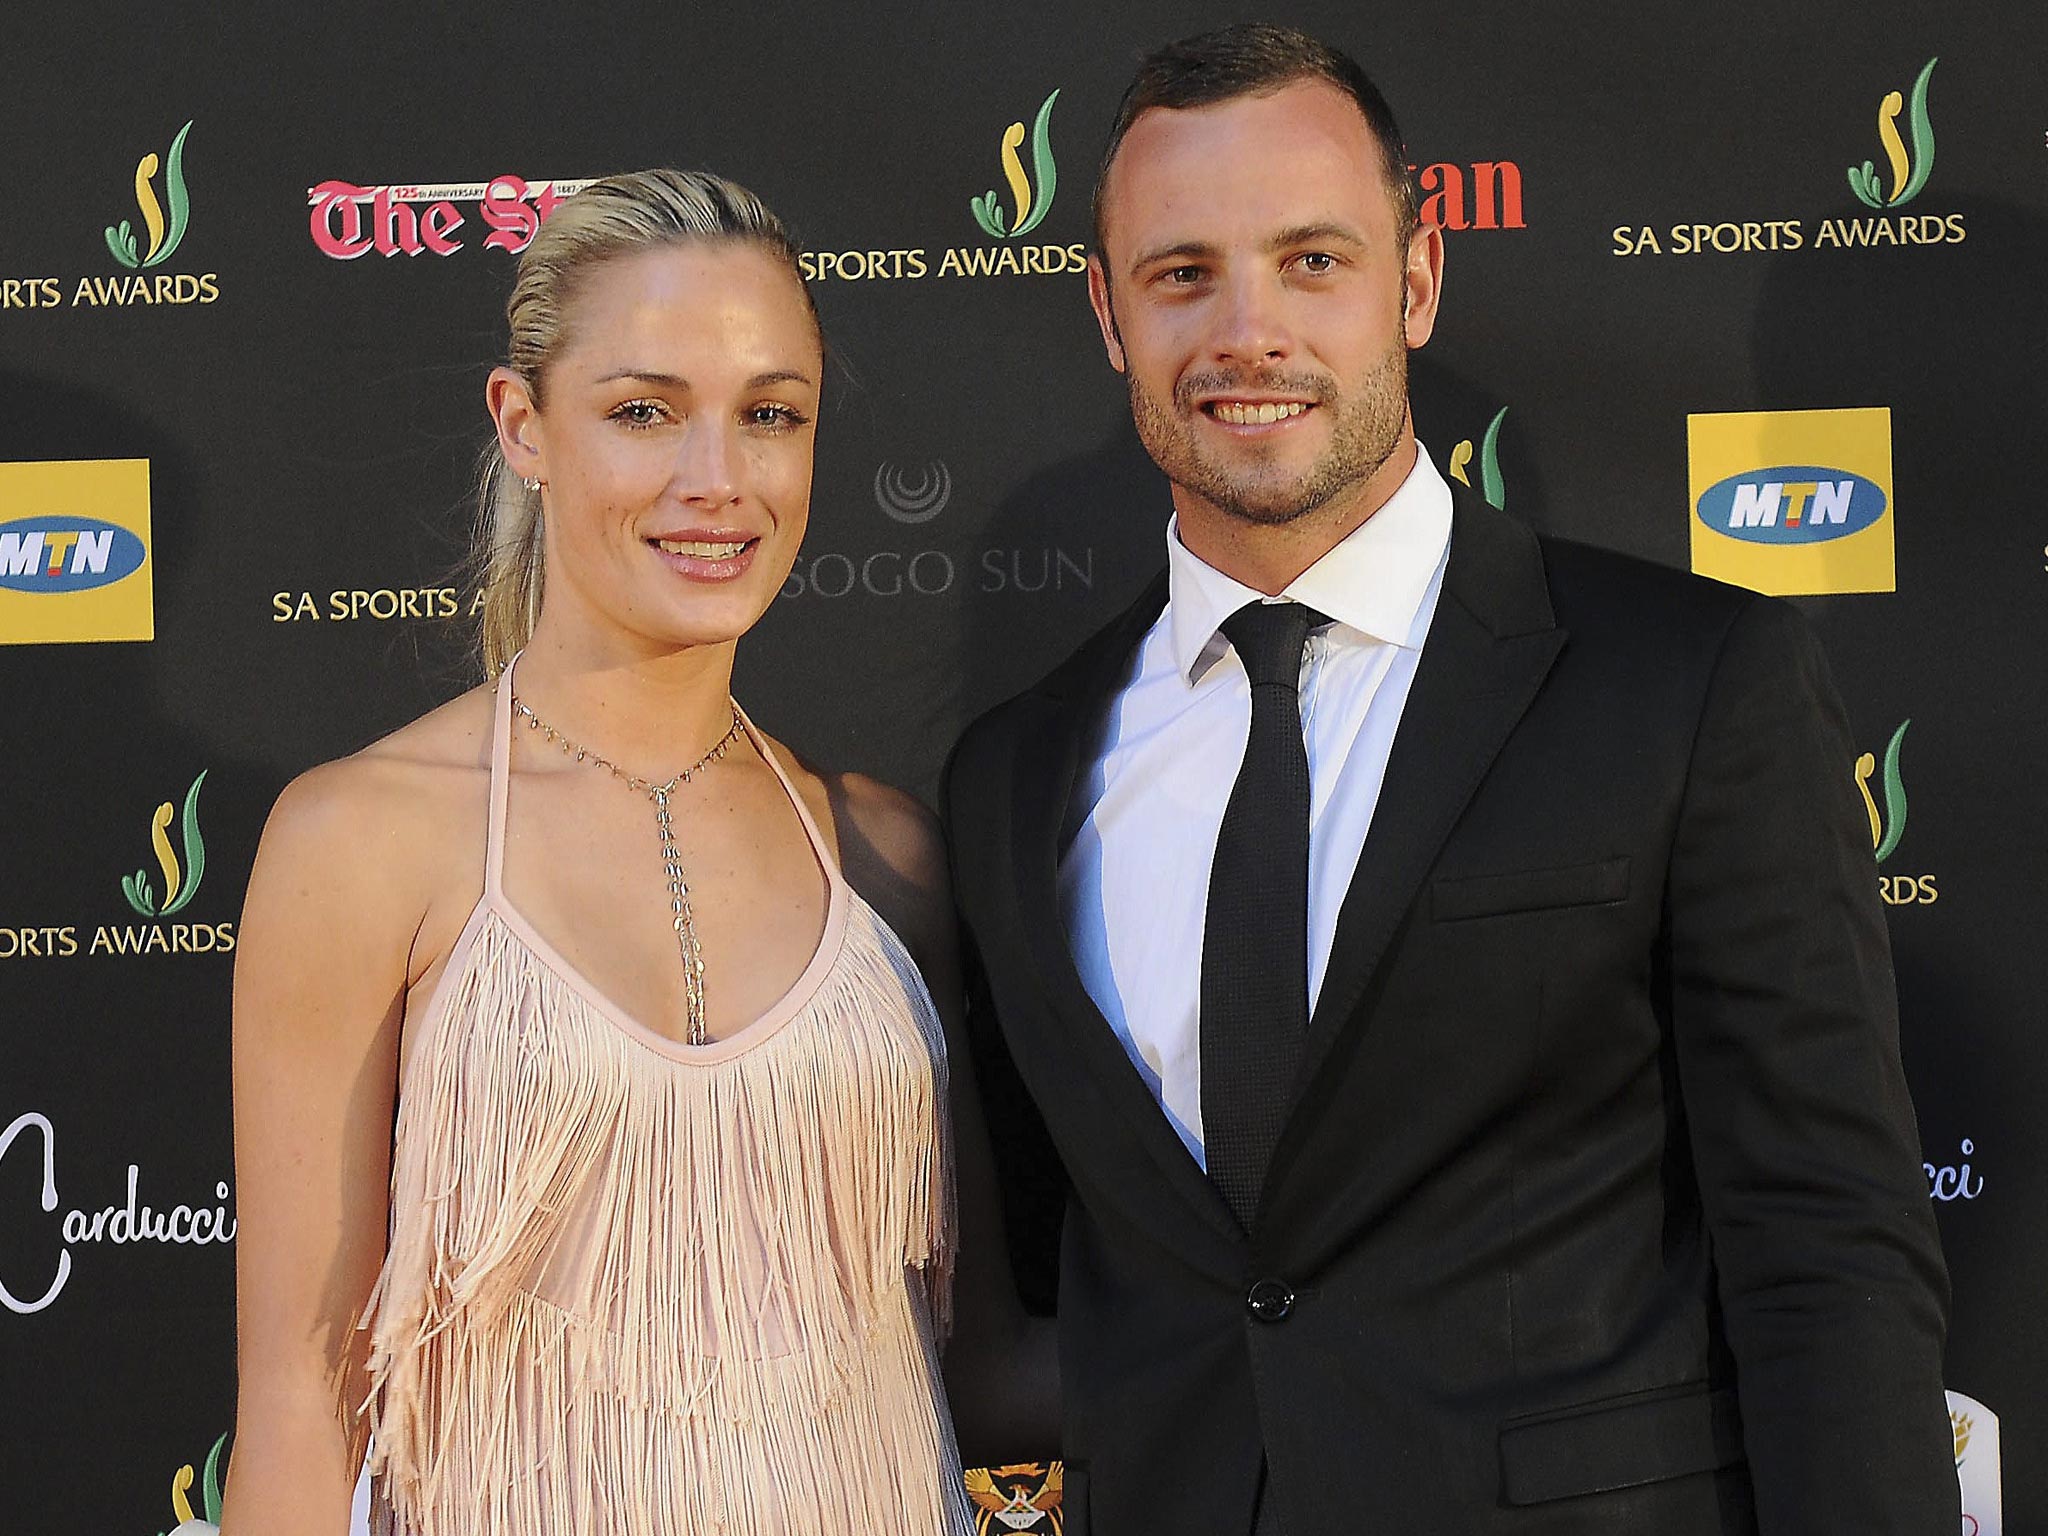 South African paralympic and Olympic sprinter Oscar Pistorius (R) posing with his girlfriend, model Reeva Steenkamp